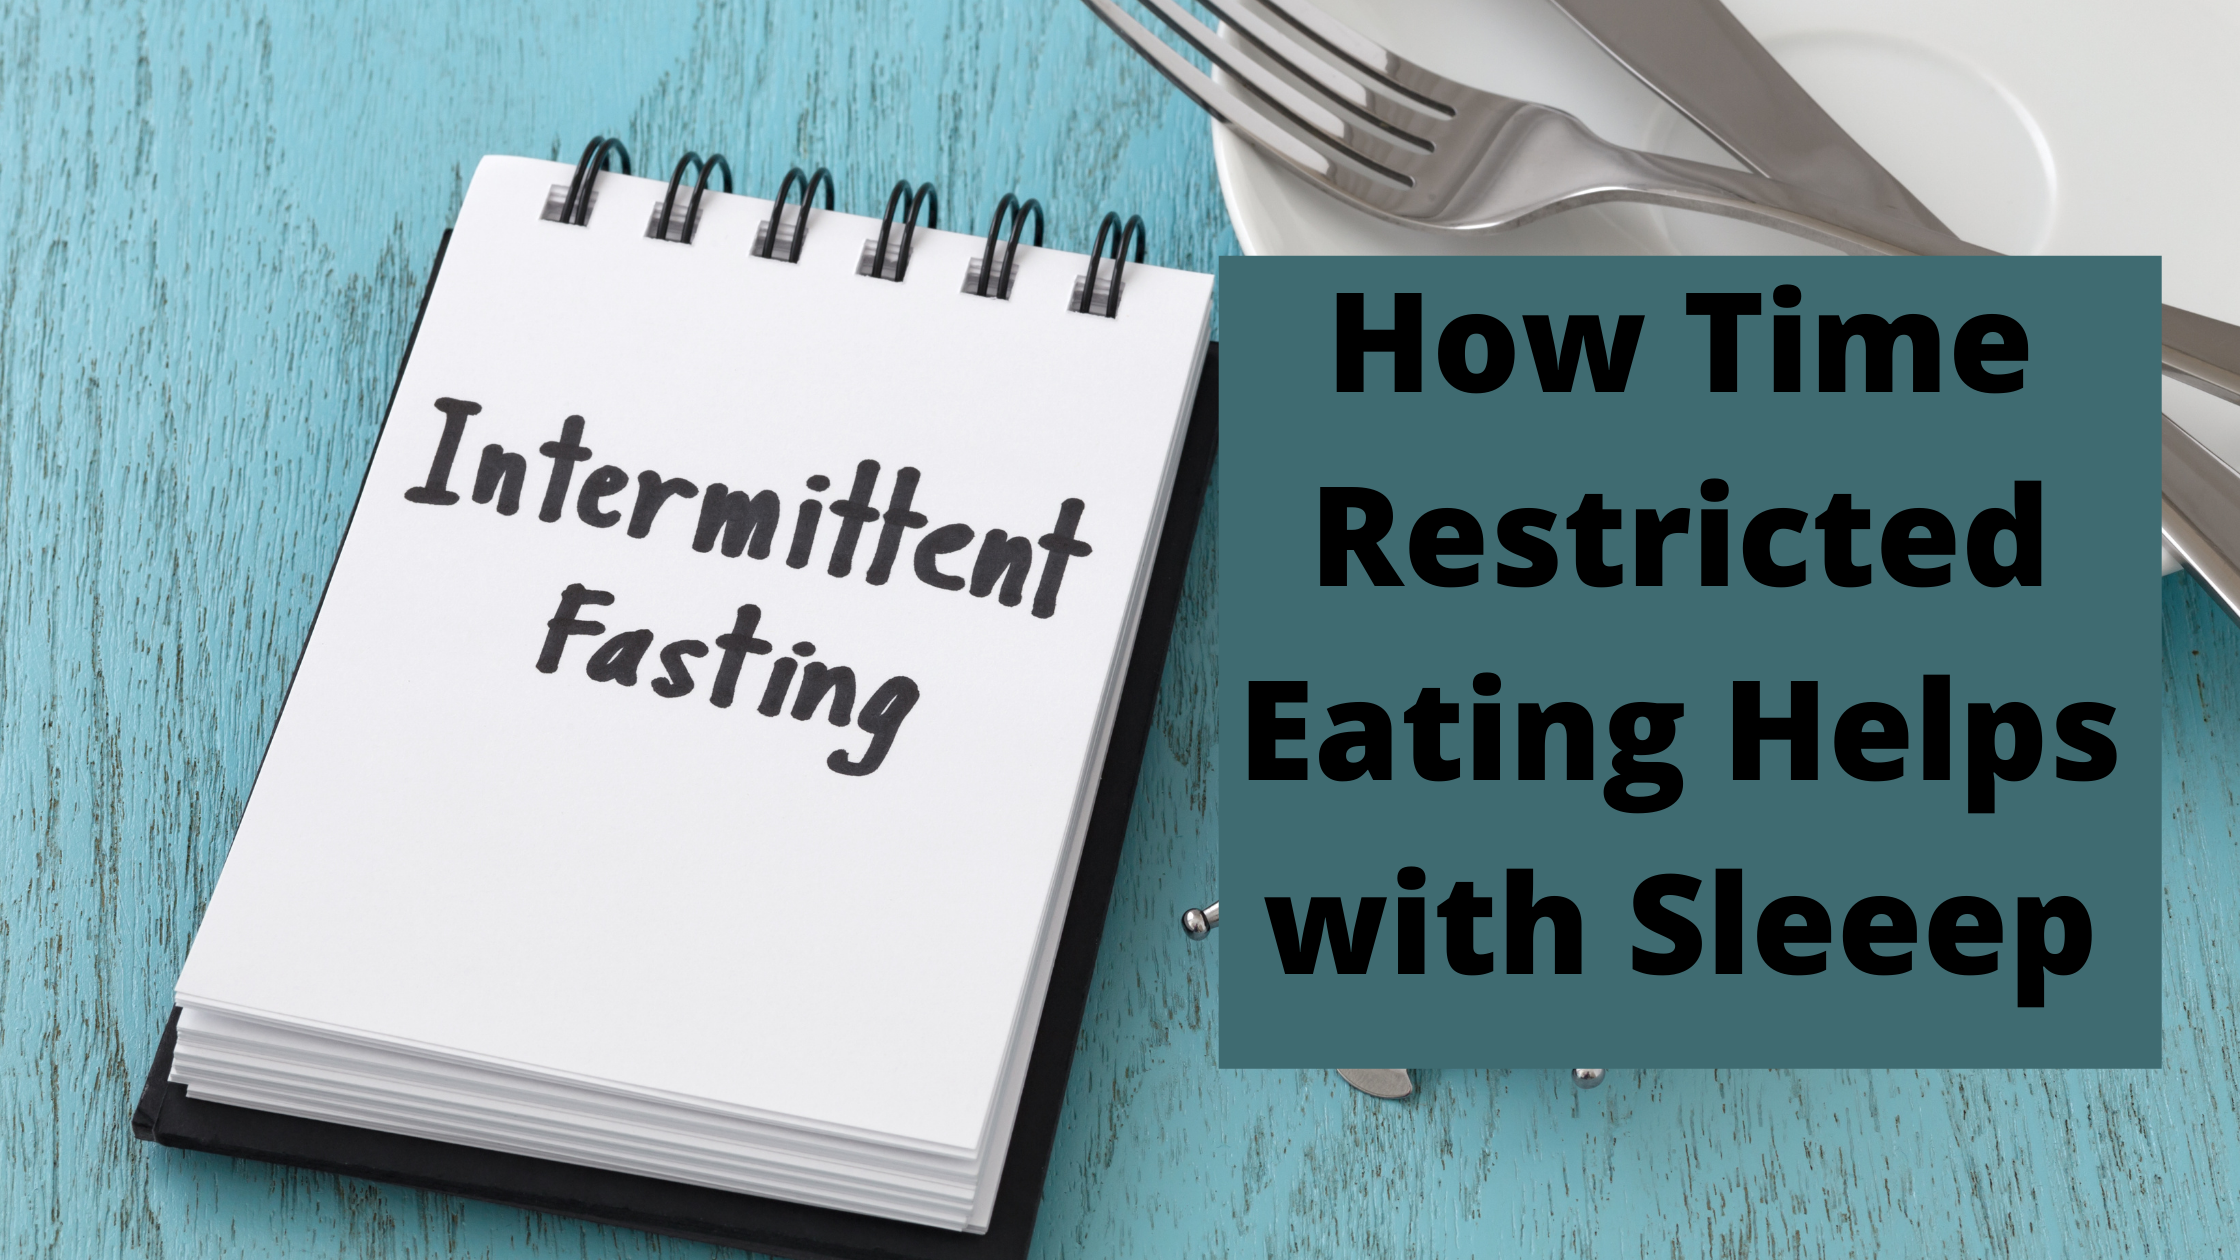 How Time Restricted Eating Helps with Sleeep